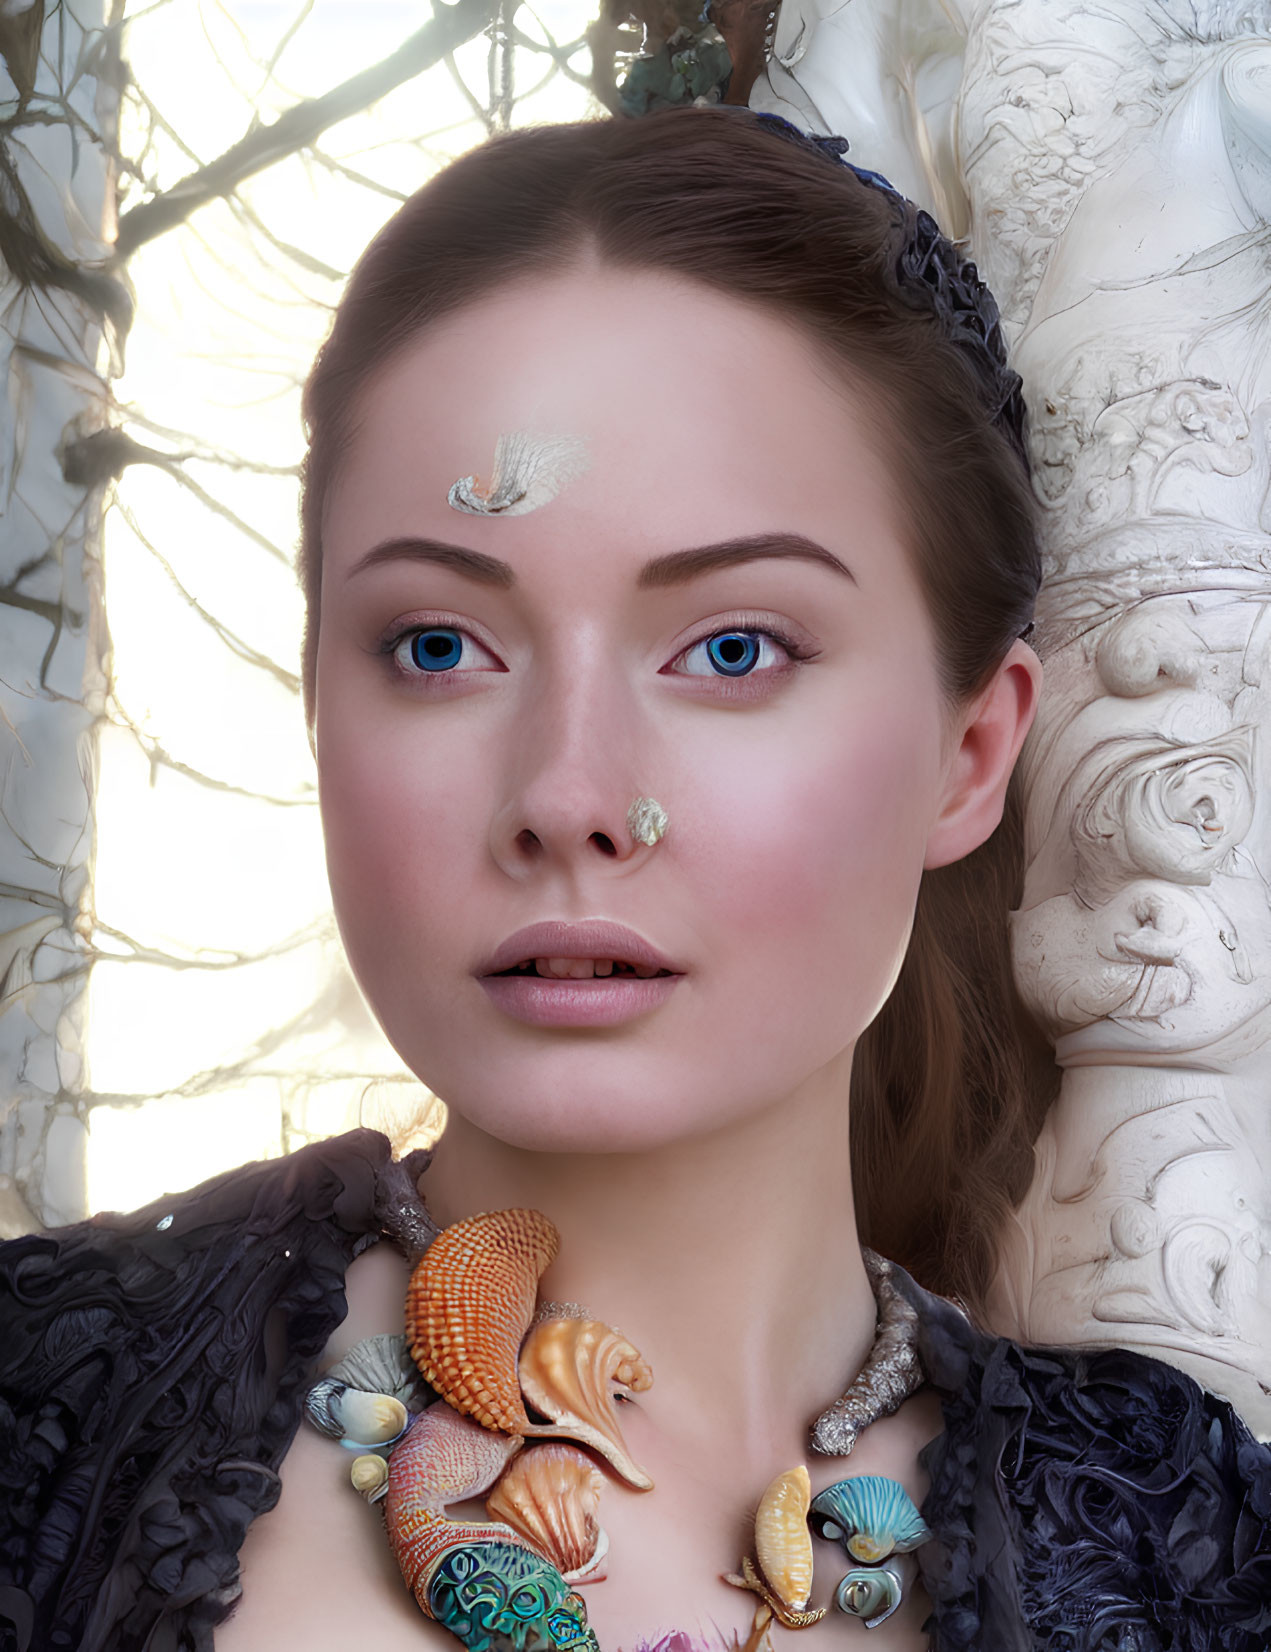 Portrait of Woman with Blue Eyes and Shell Adornment